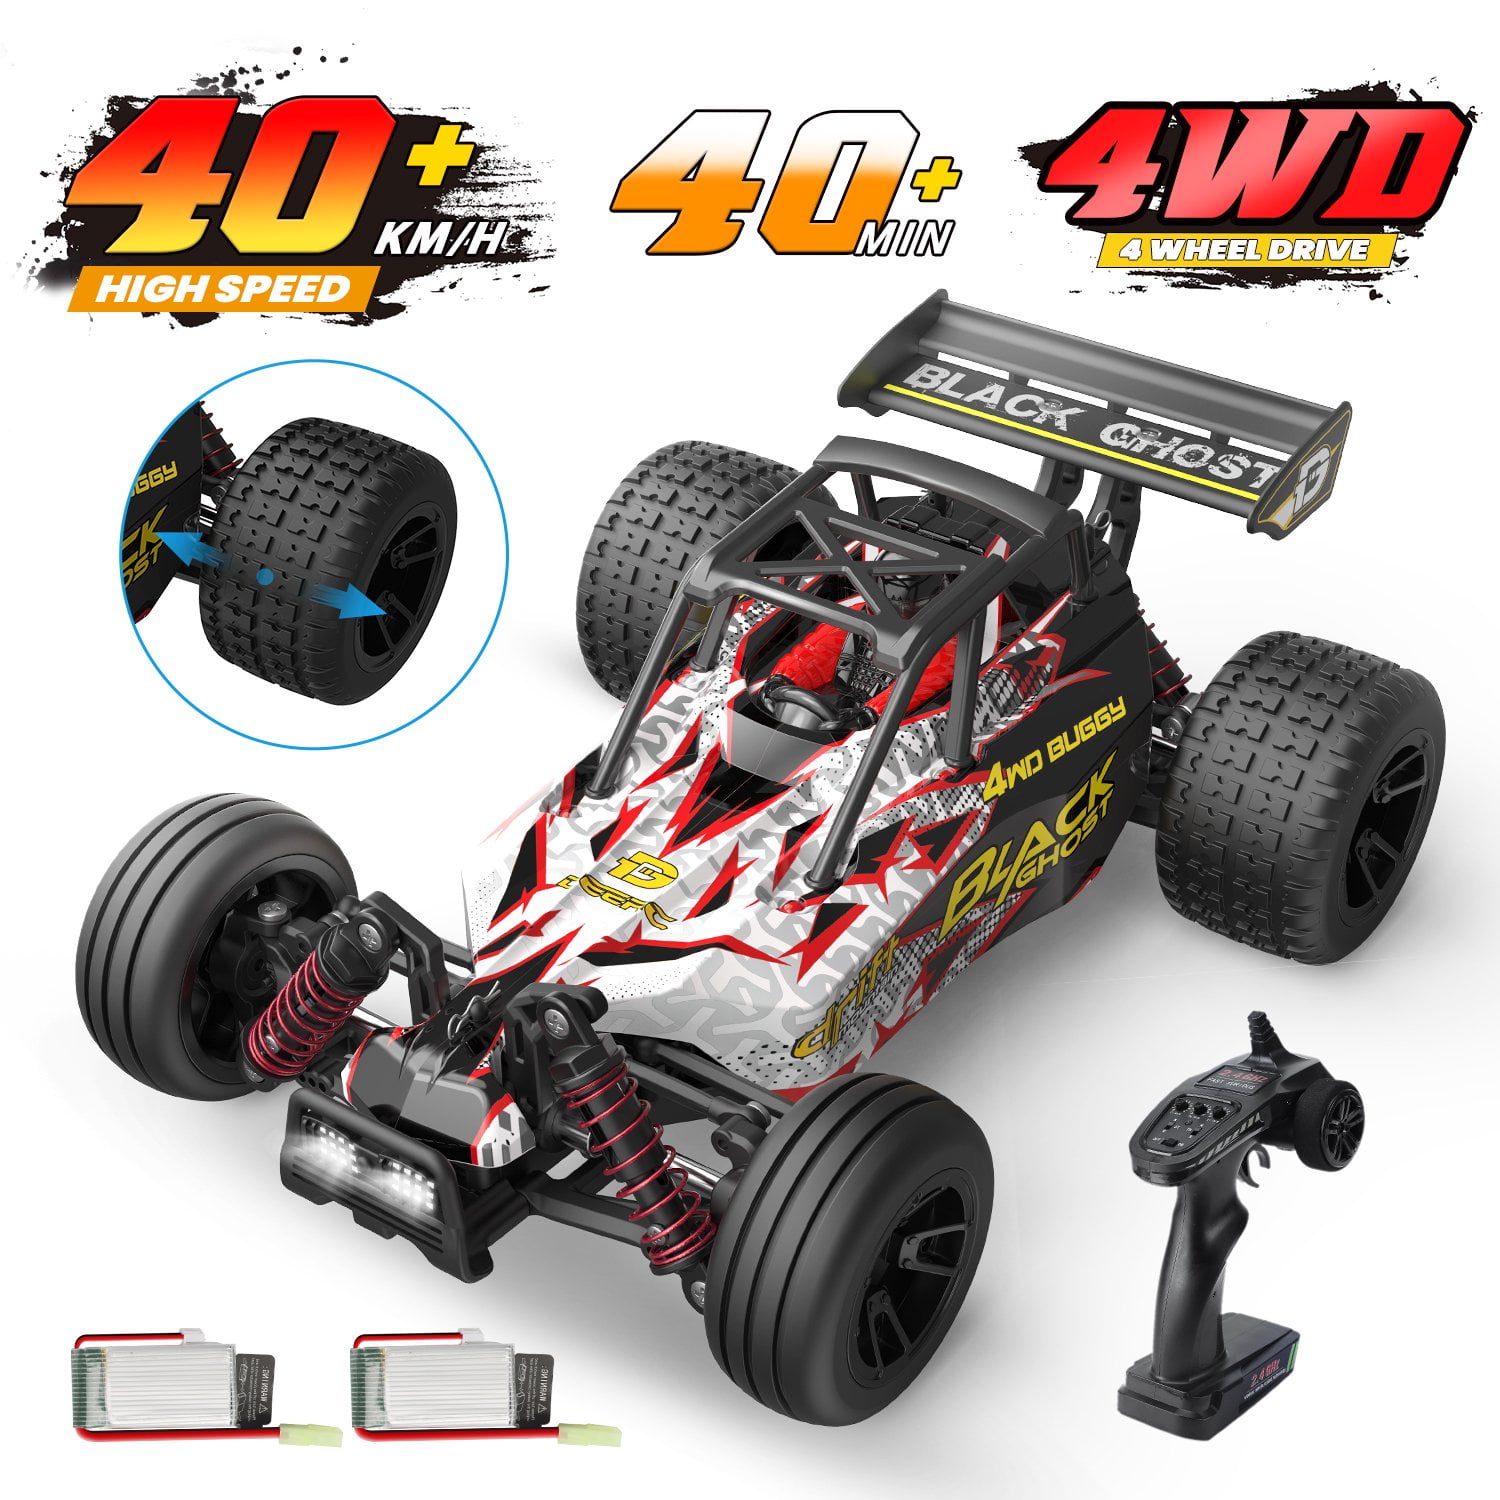 DEERC Wall Climbing RC Vehicle Car 2.4Ghz Remote Control Stunt Racing Cars Toys